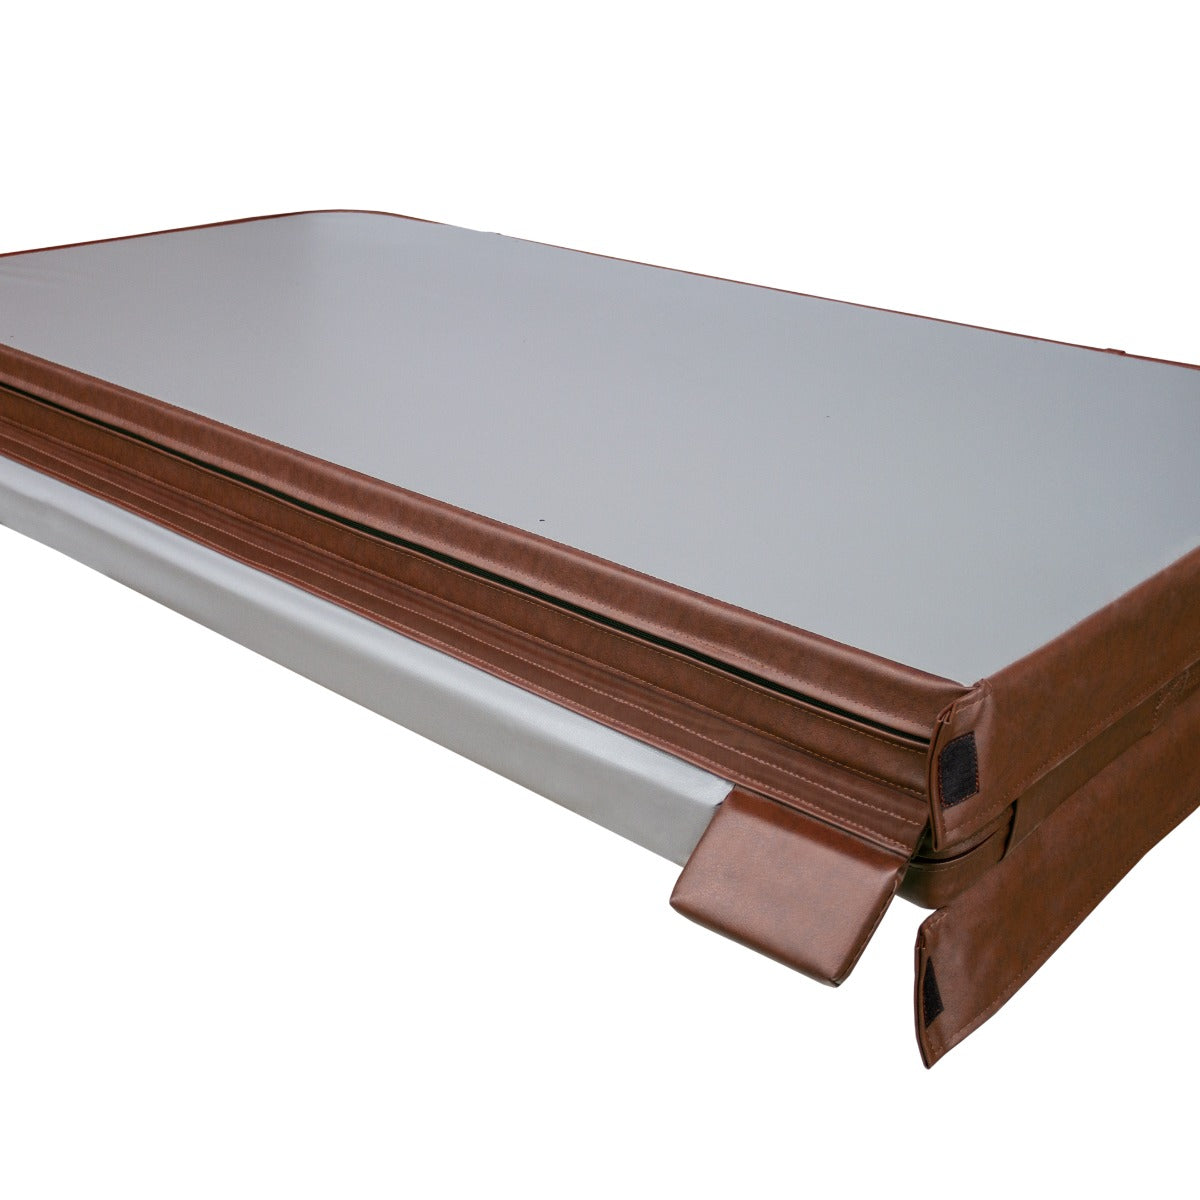 2.1m Hot Tub Spa Cover – Brown